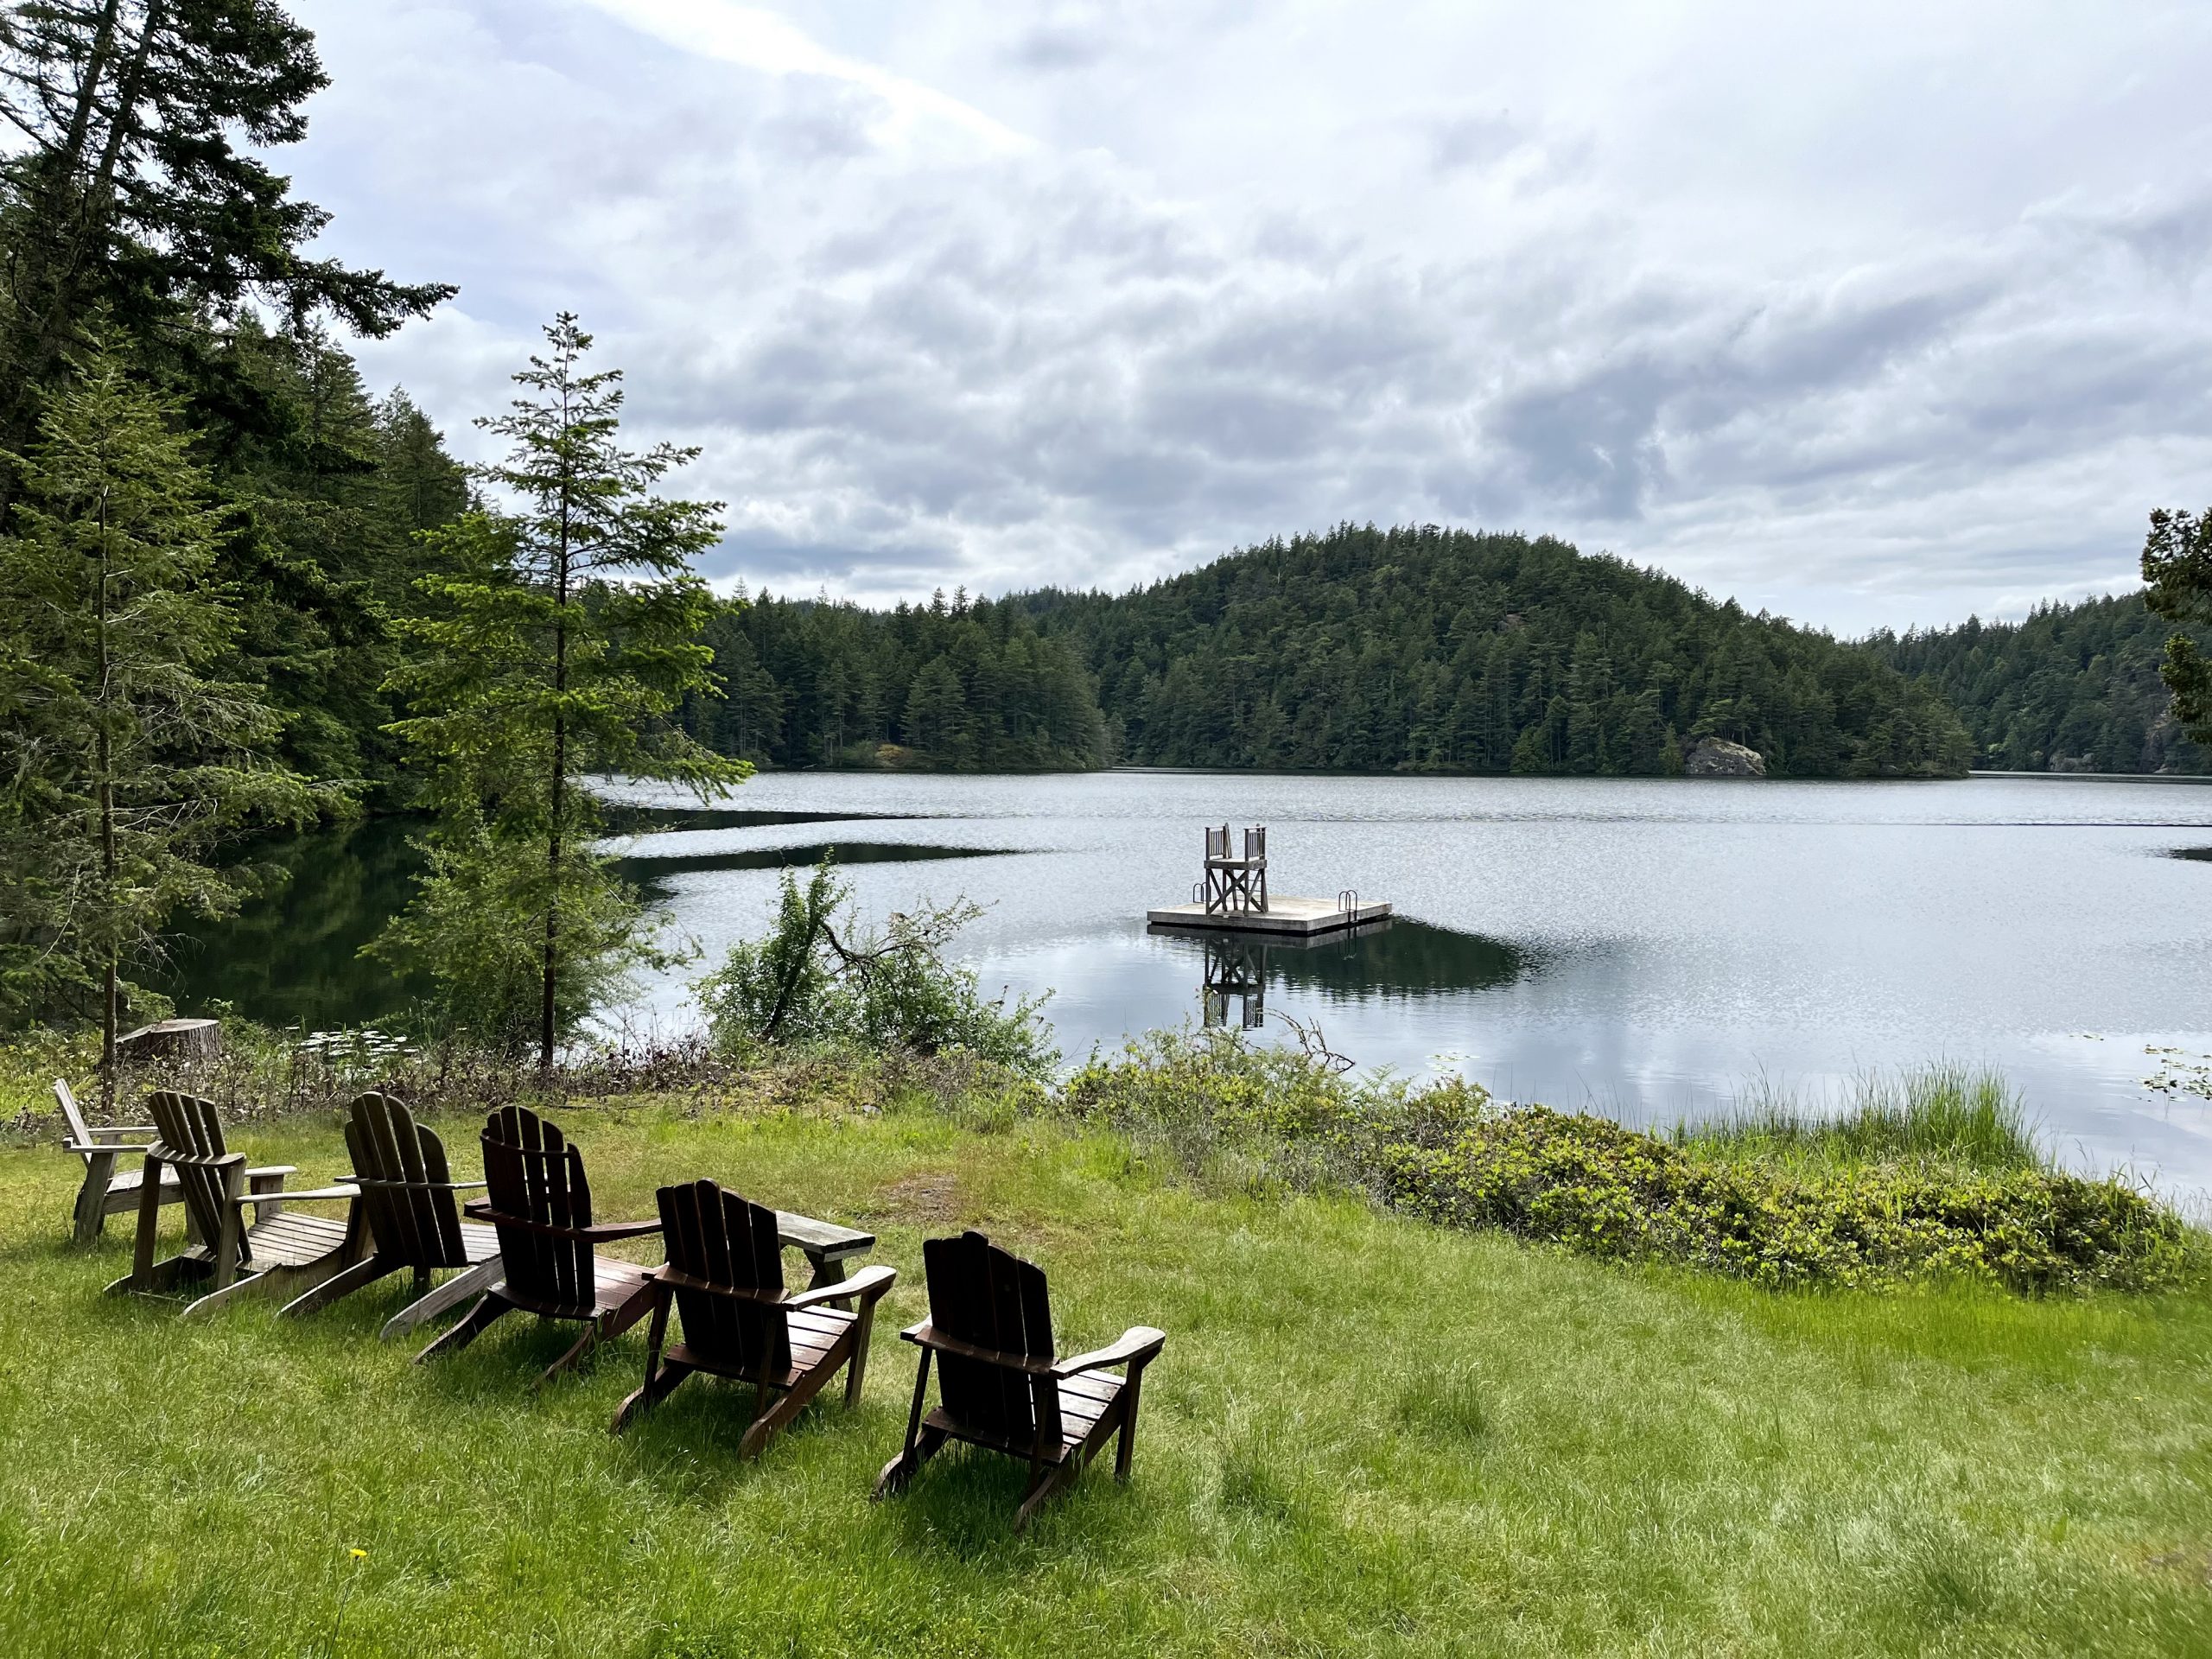 Adirondack seating on the shore's of Blakely's Horsehoe Lake